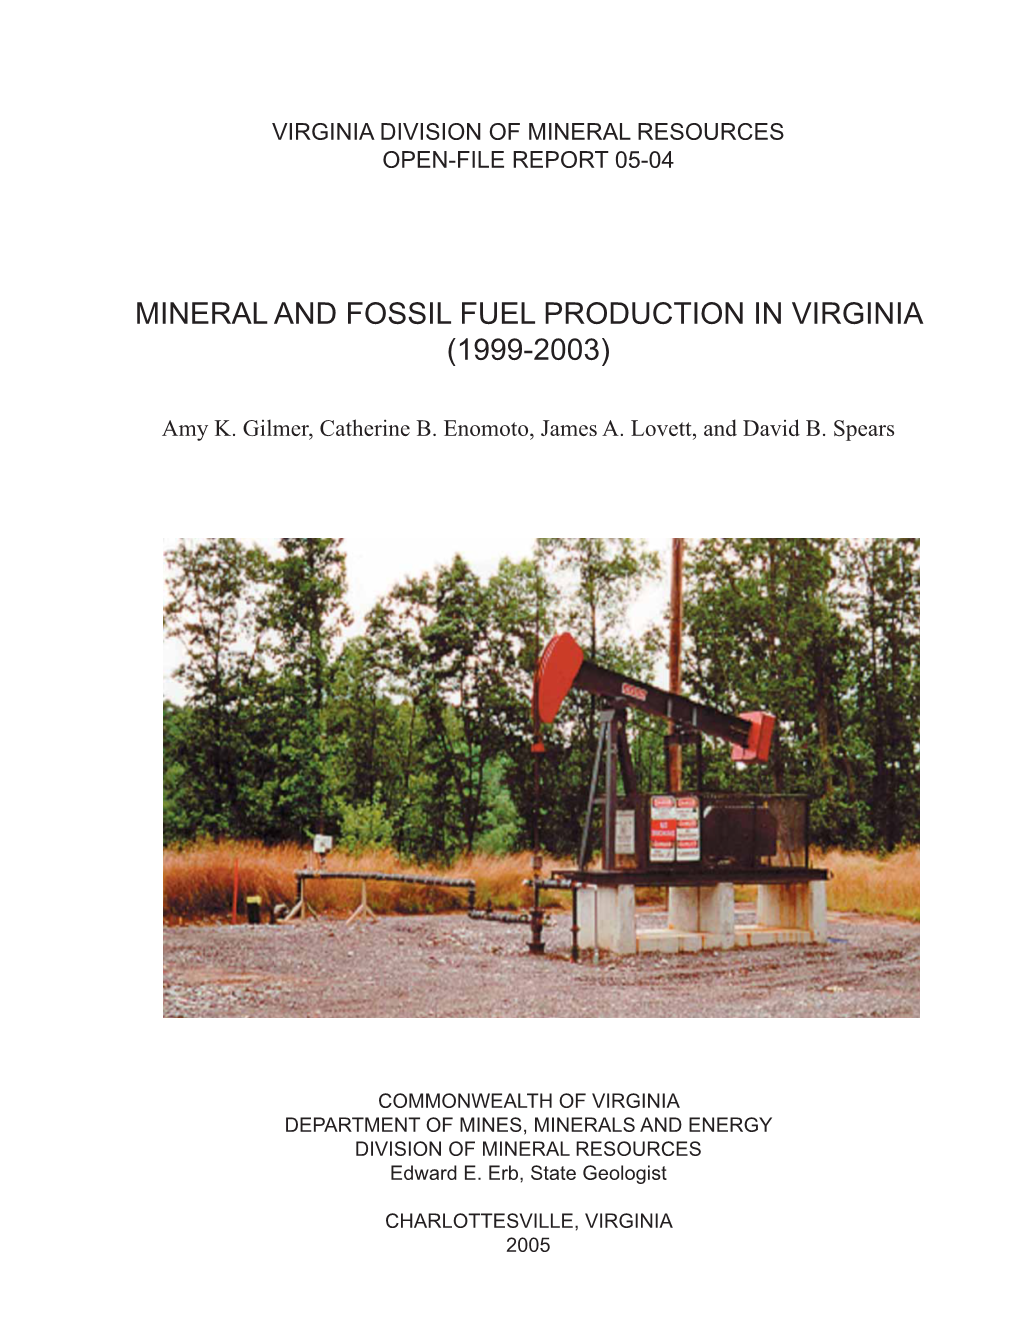 Mineral and Fossil Fuel Production in Virginia (1999-2003)